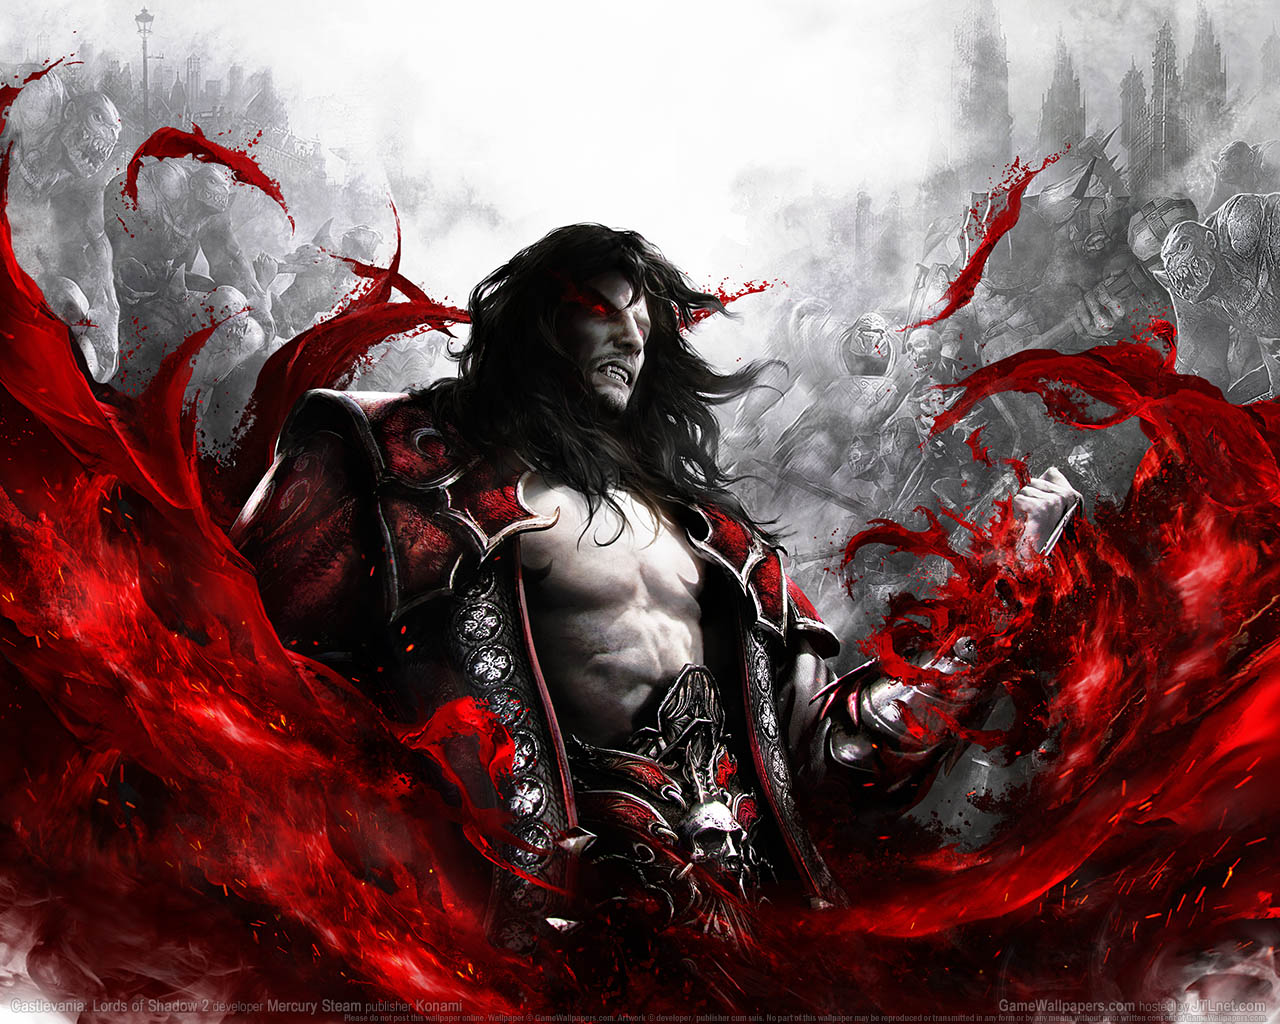 Castlevania%3A Lords of Shadow 2 achtergrond 03 1280x1024